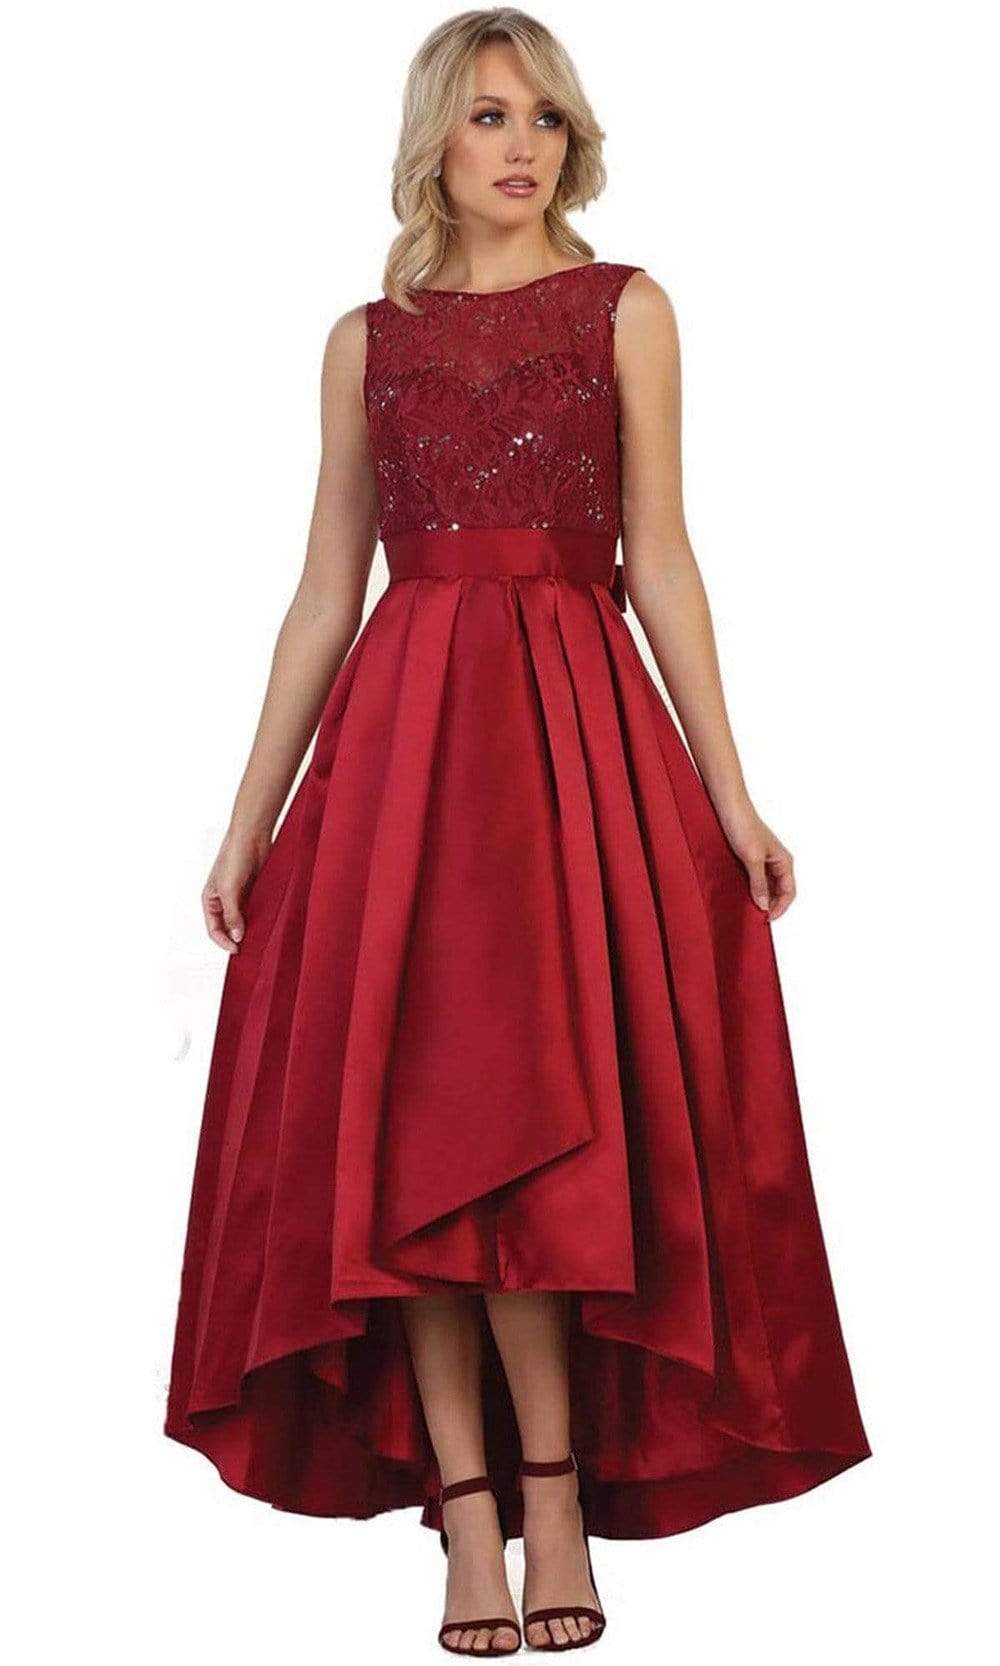 May Queen - High Low Illusion Jewel A-line Evening Dress Special Occasion Dress 4 / Burgundy